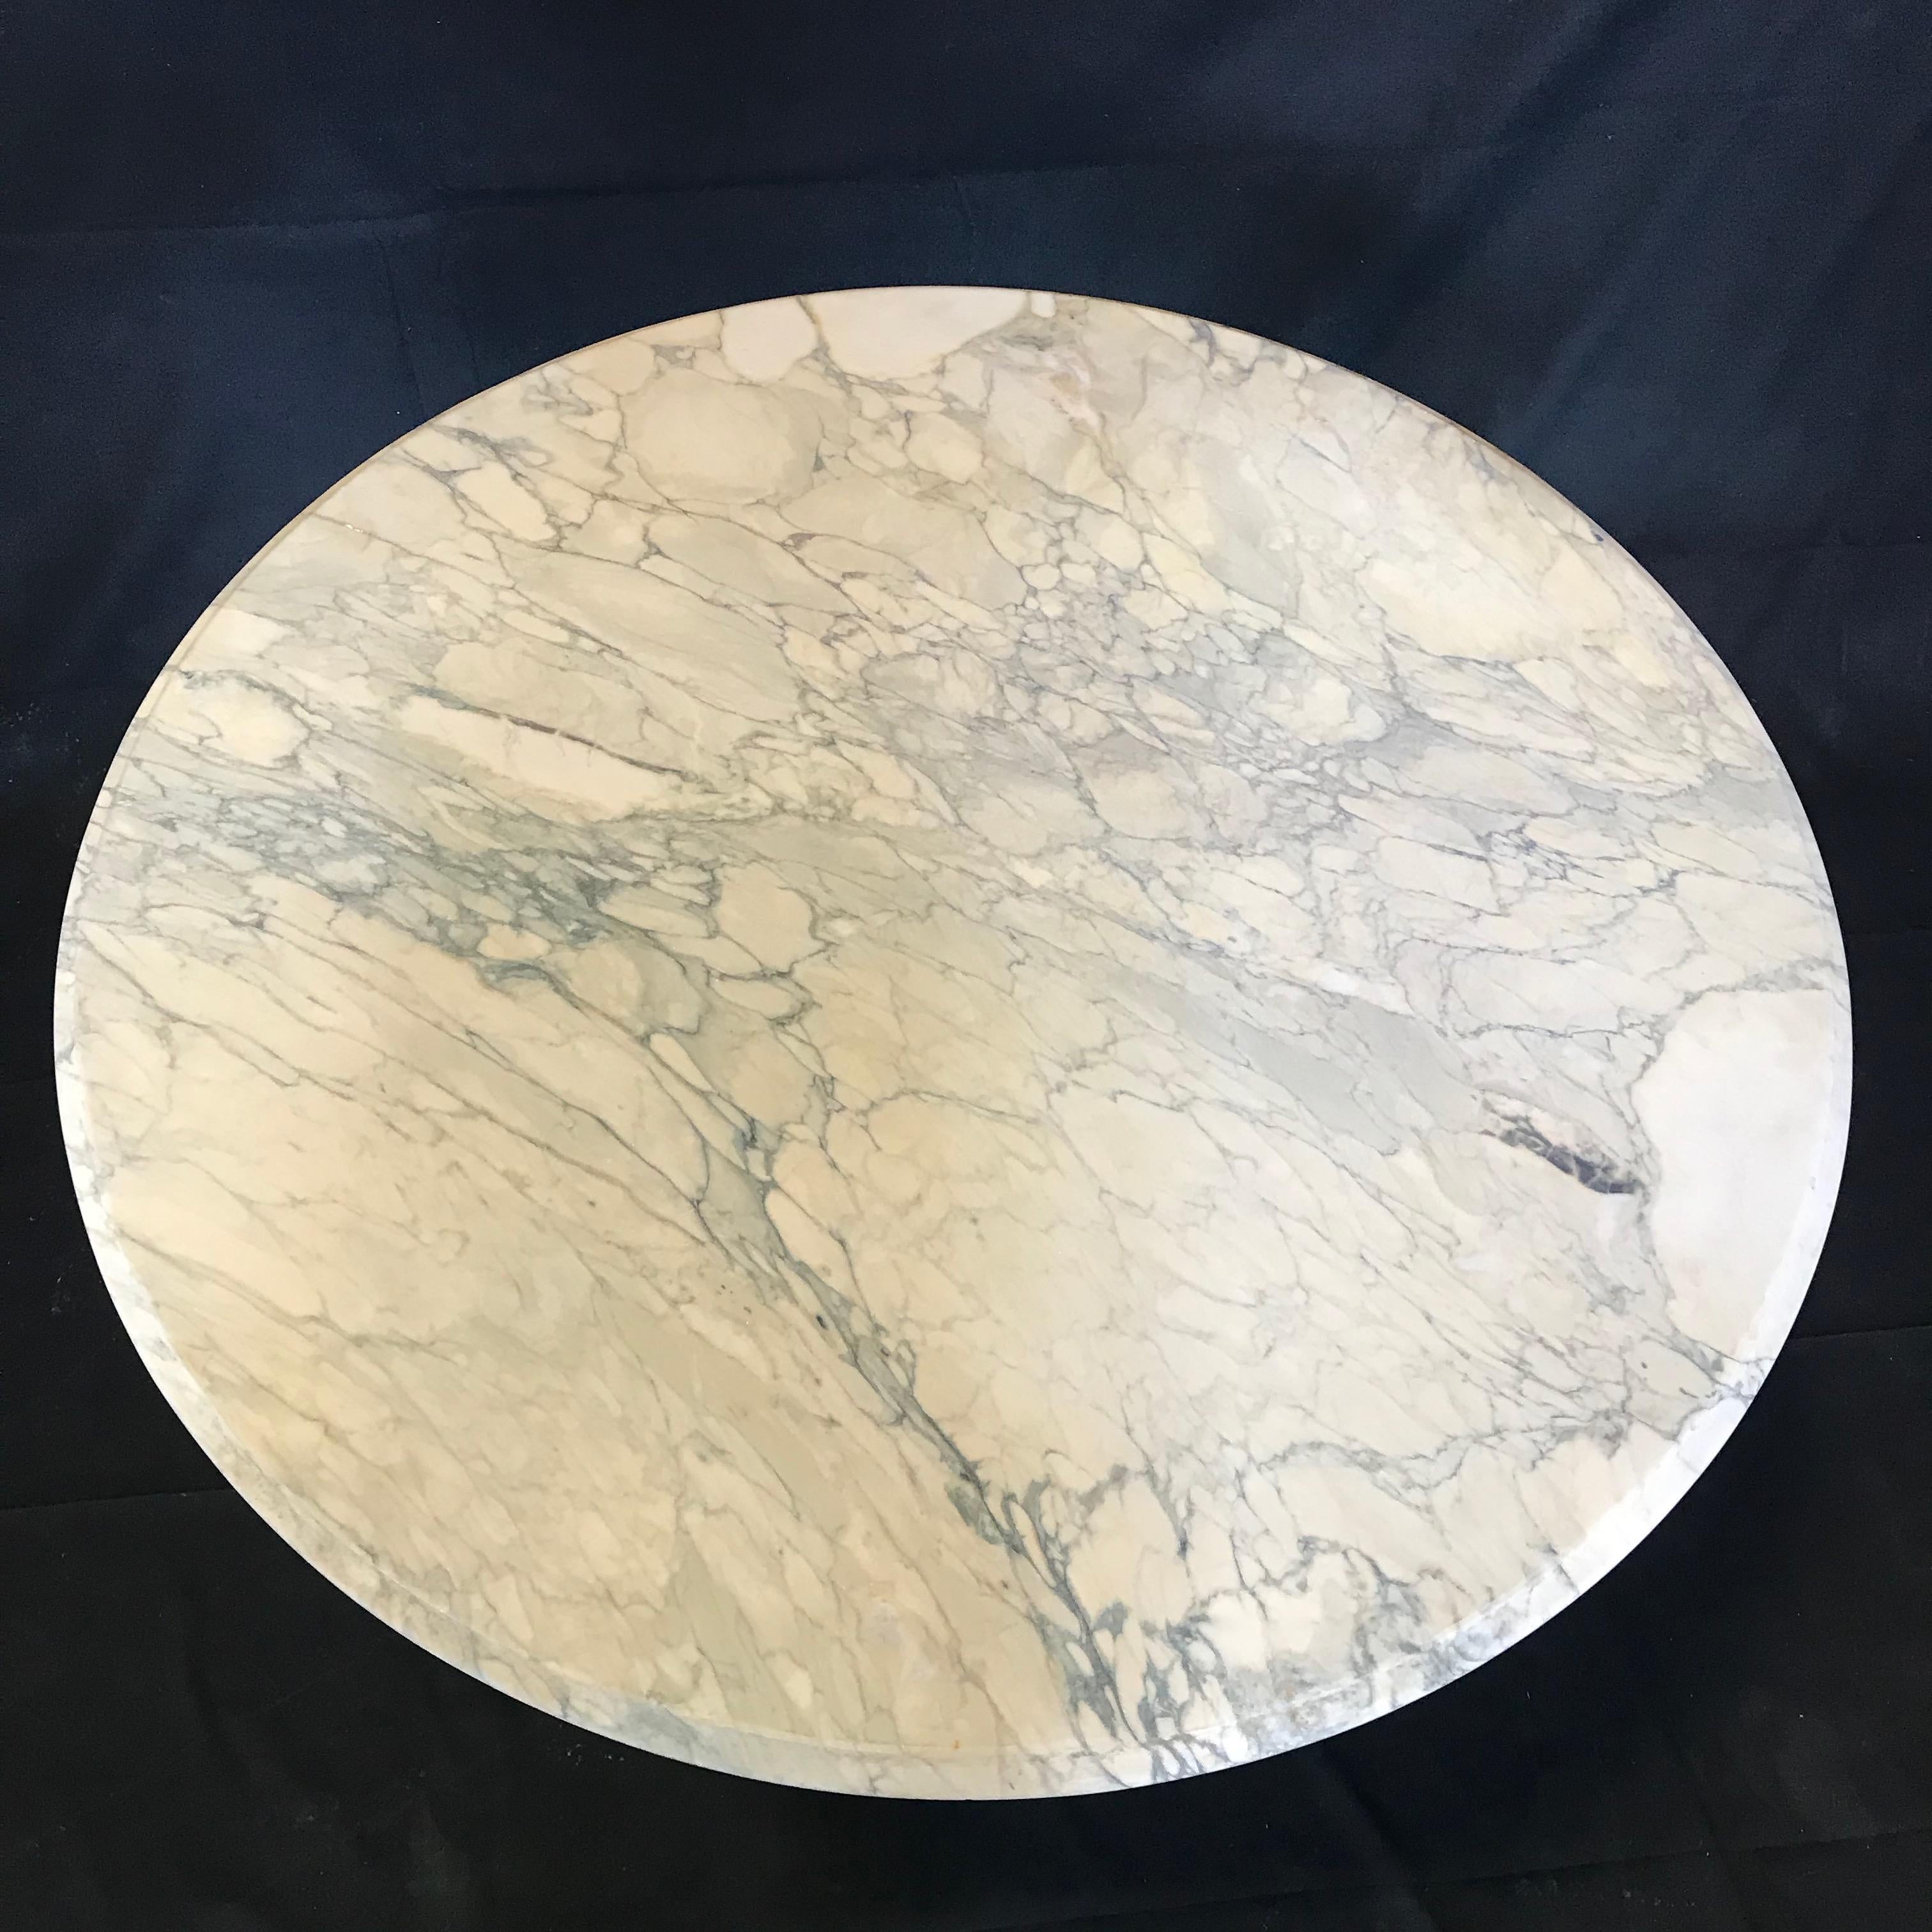 French cafe or bistro table having beautiful white Carrara marble top and dolphin feet on metal pedestal base - perfect for dining indoor or outdoors!
#3579
Measures: H skirt 26.75”.